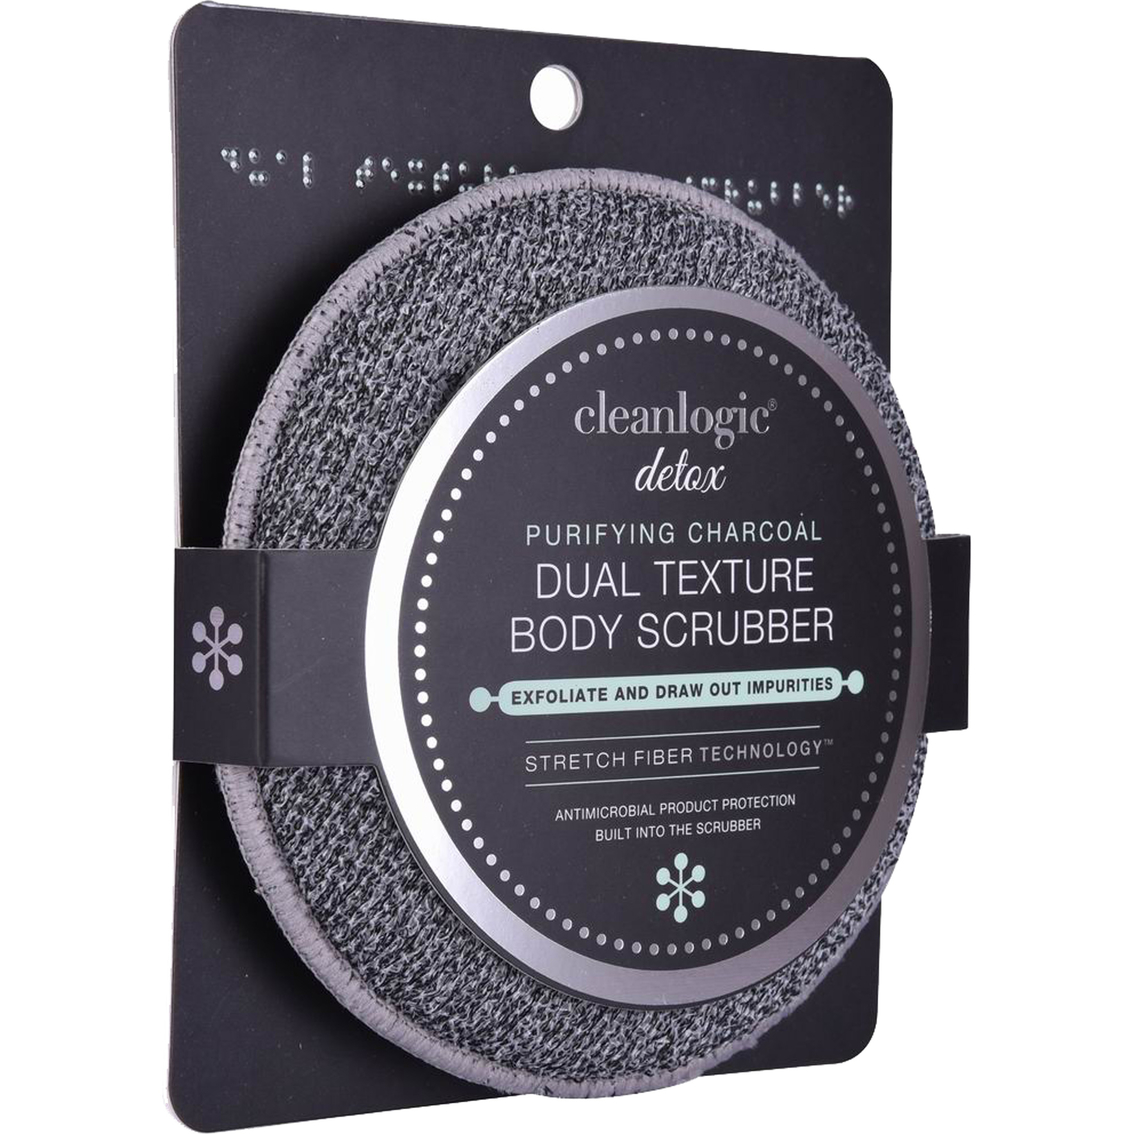 Cleanlogic Detox Purifying Charcoal Dual Texture Body Scrubber - Image 2 of 2